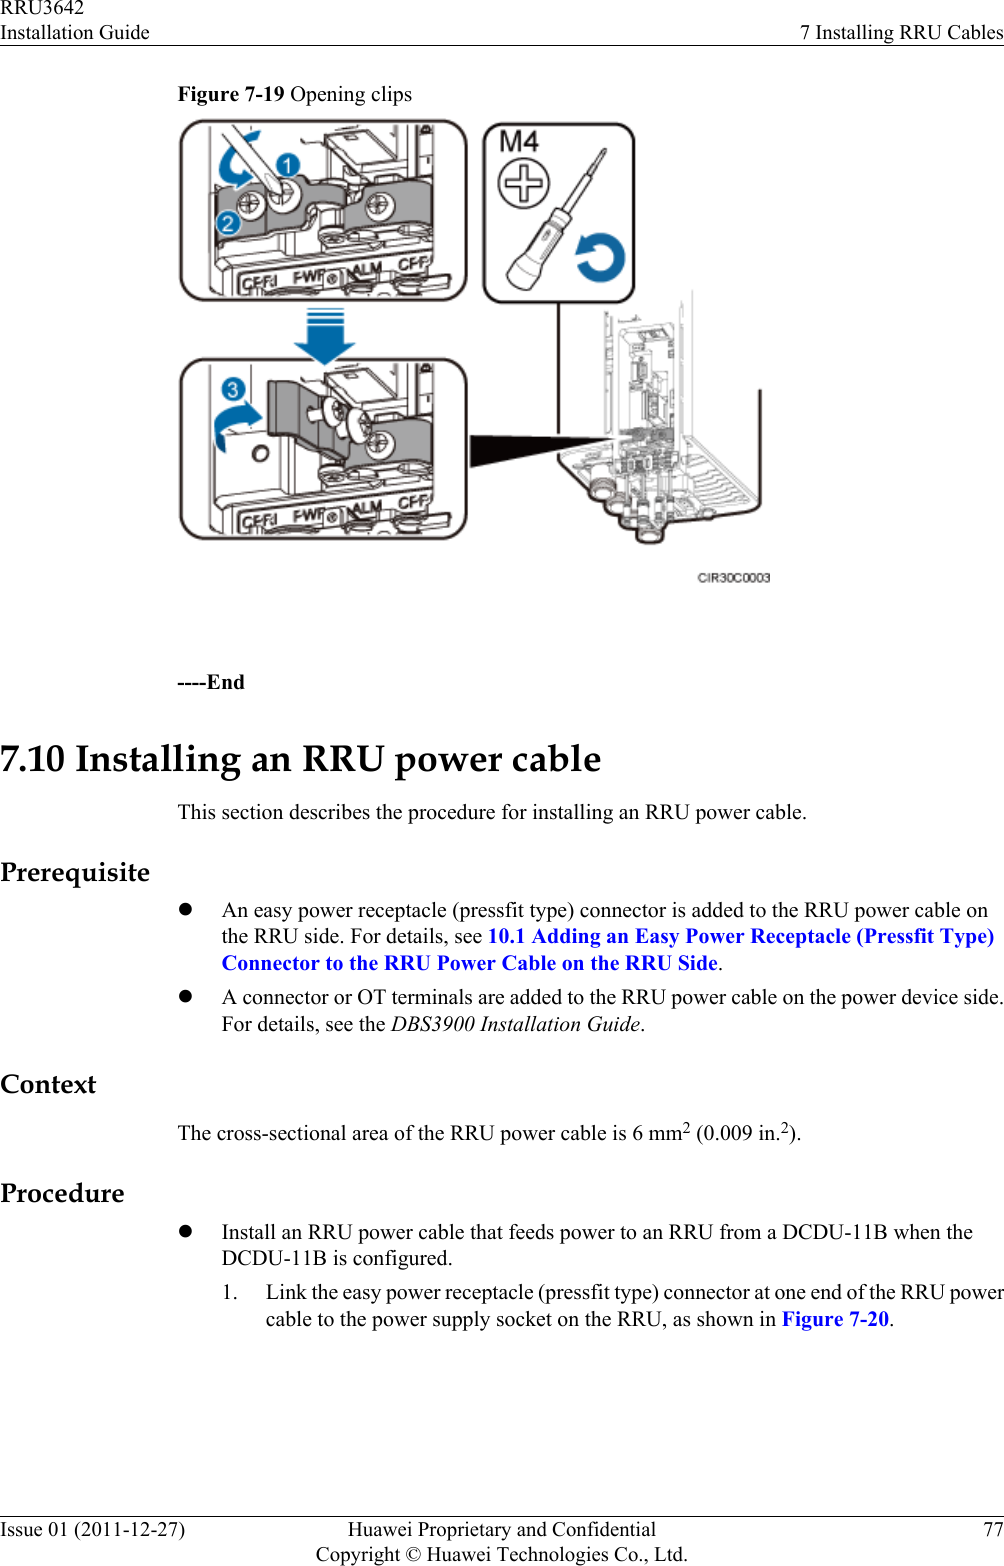 Figure 7-19 Opening clips ----End7.10 Installing an RRU power cableThis section describes the procedure for installing an RRU power cable.PrerequisitelAn easy power receptacle (pressfit type) connector is added to the RRU power cable onthe RRU side. For details, see 10.1 Adding an Easy Power Receptacle (Pressfit Type)Connector to the RRU Power Cable on the RRU Side.lA connector or OT terminals are added to the RRU power cable on the power device side.For details, see the DBS3900 Installation Guide.ContextThe cross-sectional area of the RRU power cable is 6 mm2 (0.009 in.2).ProcedurelInstall an RRU power cable that feeds power to an RRU from a DCDU-11B when theDCDU-11B is configured.1. Link the easy power receptacle (pressfit type) connector at one end of the RRU powercable to the power supply socket on the RRU, as shown in Figure 7-20.RRU3642Installation Guide 7 Installing RRU CablesIssue 01 (2011-12-27) Huawei Proprietary and ConfidentialCopyright © Huawei Technologies Co., Ltd.77